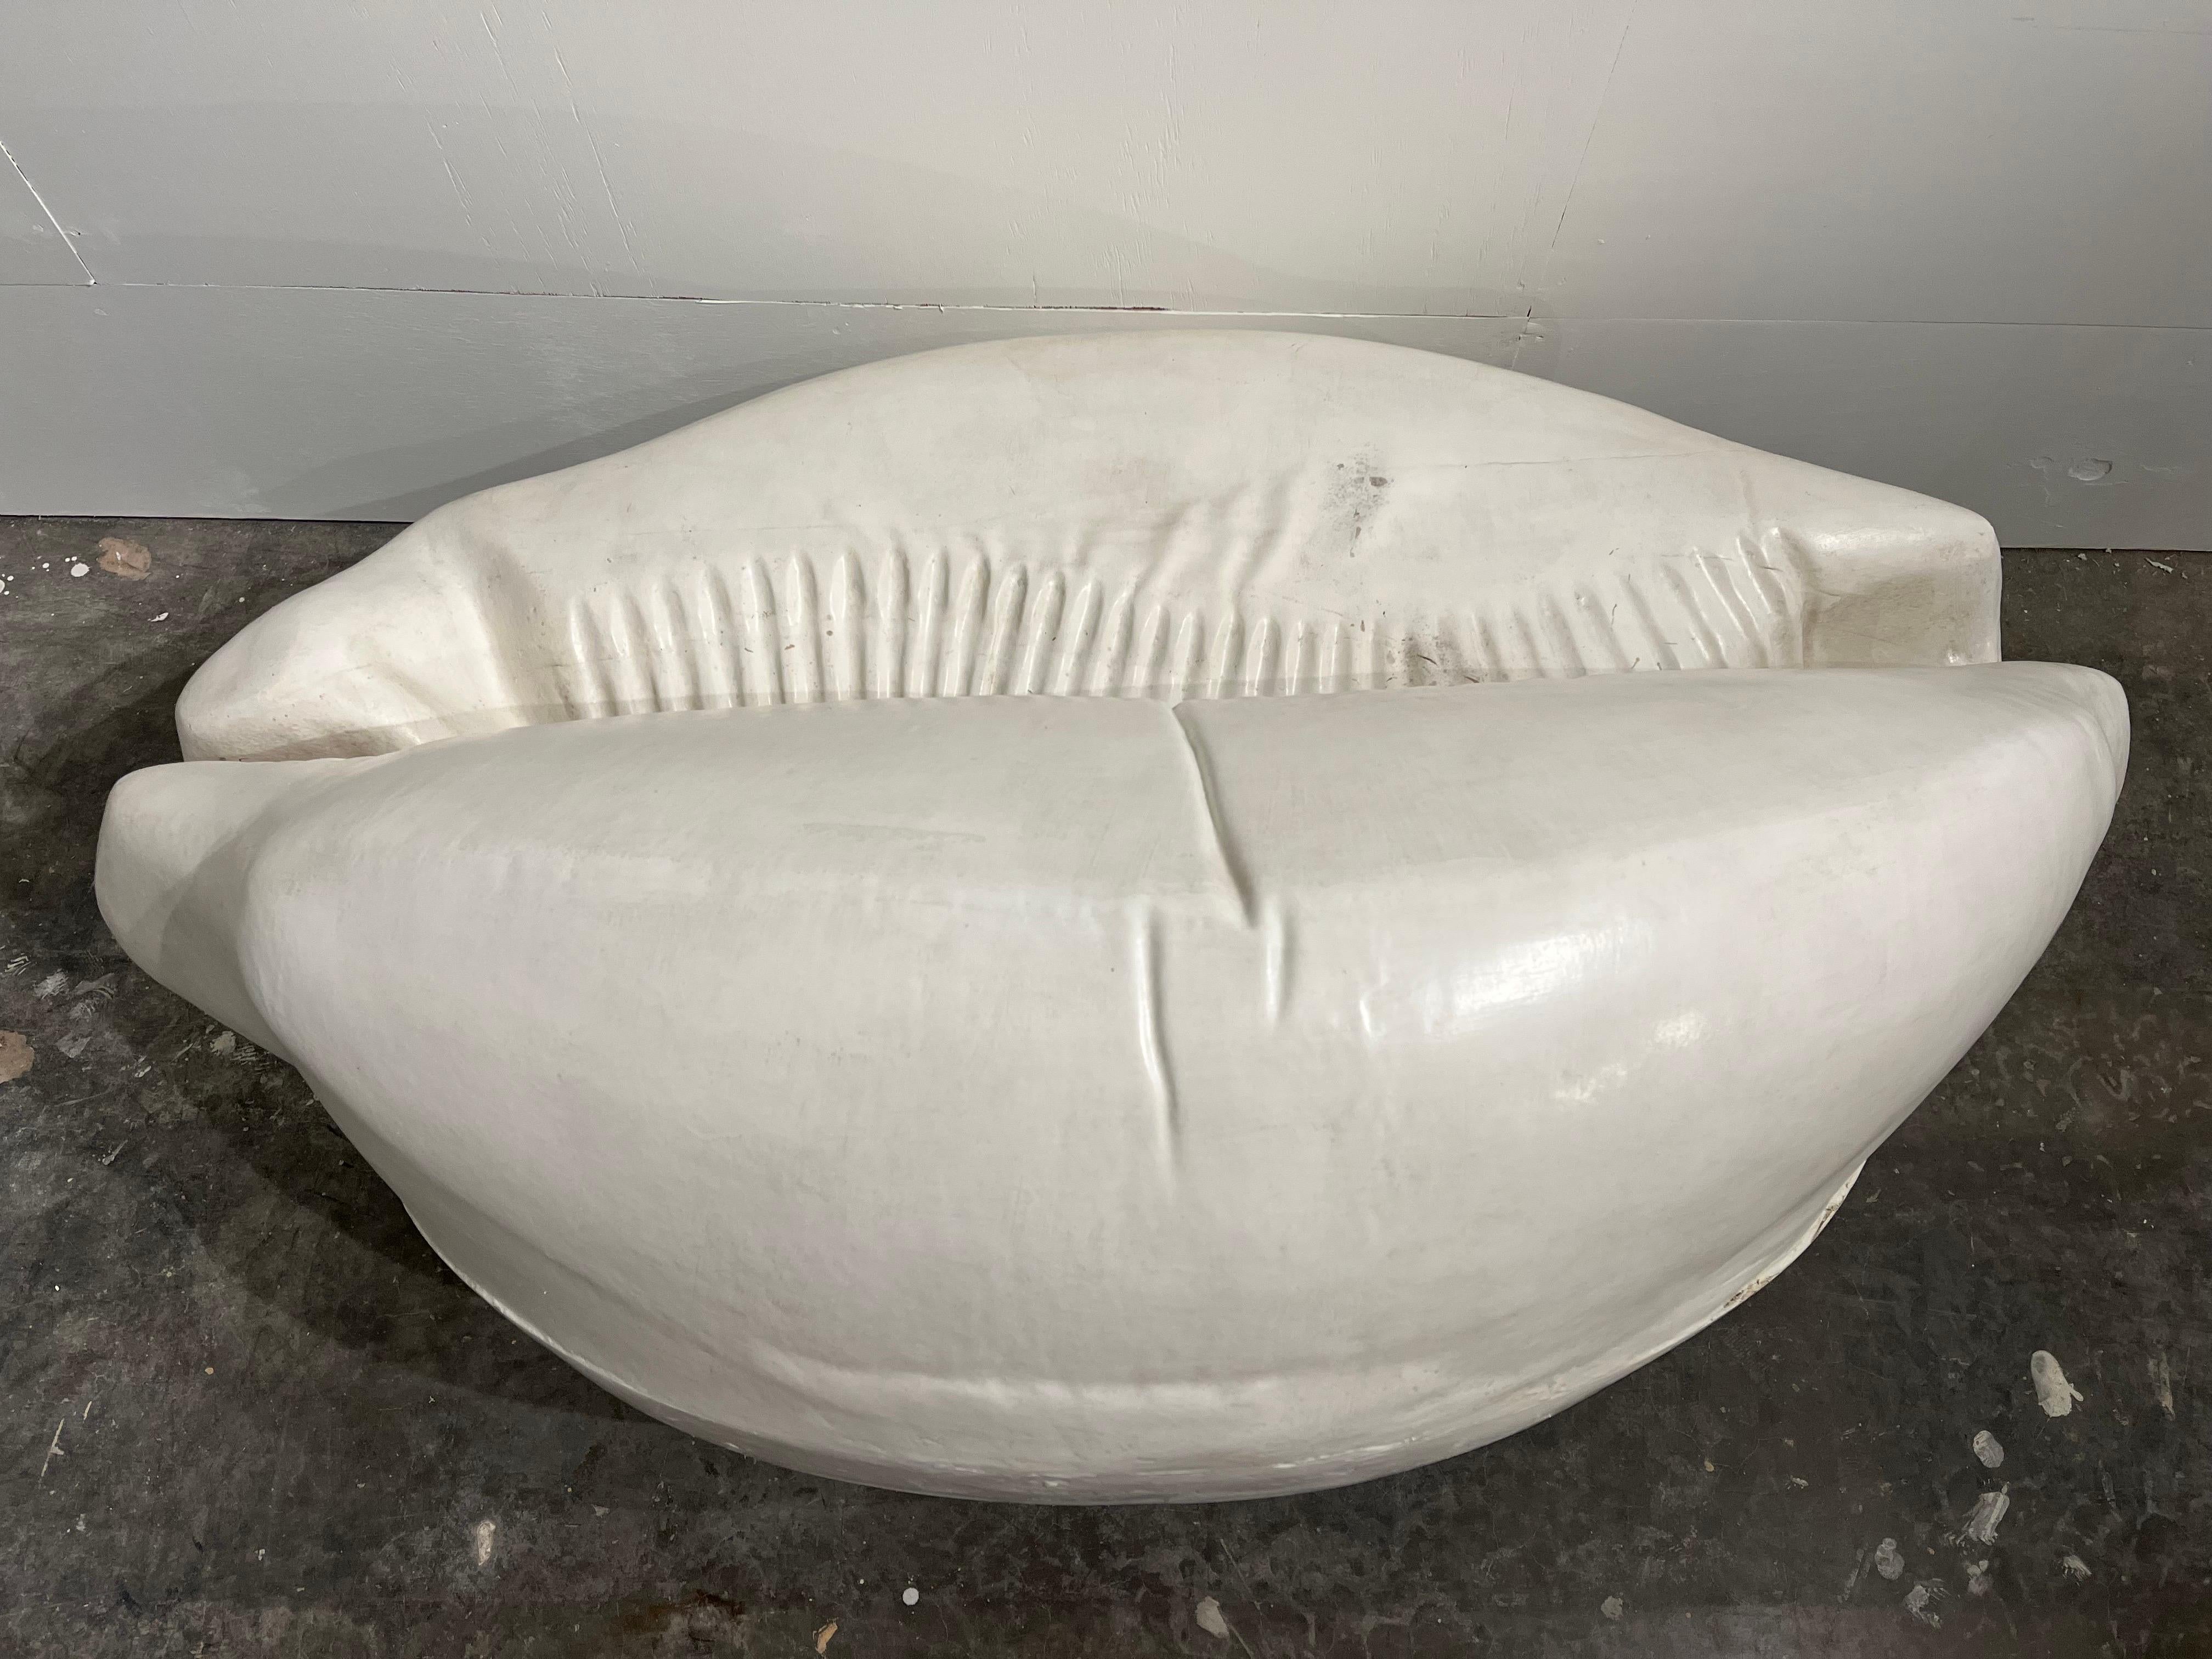 Molded Louis Durot French Post War Artist Cowrie Shell Sofa Settee Sculpture in Polymer For Sale